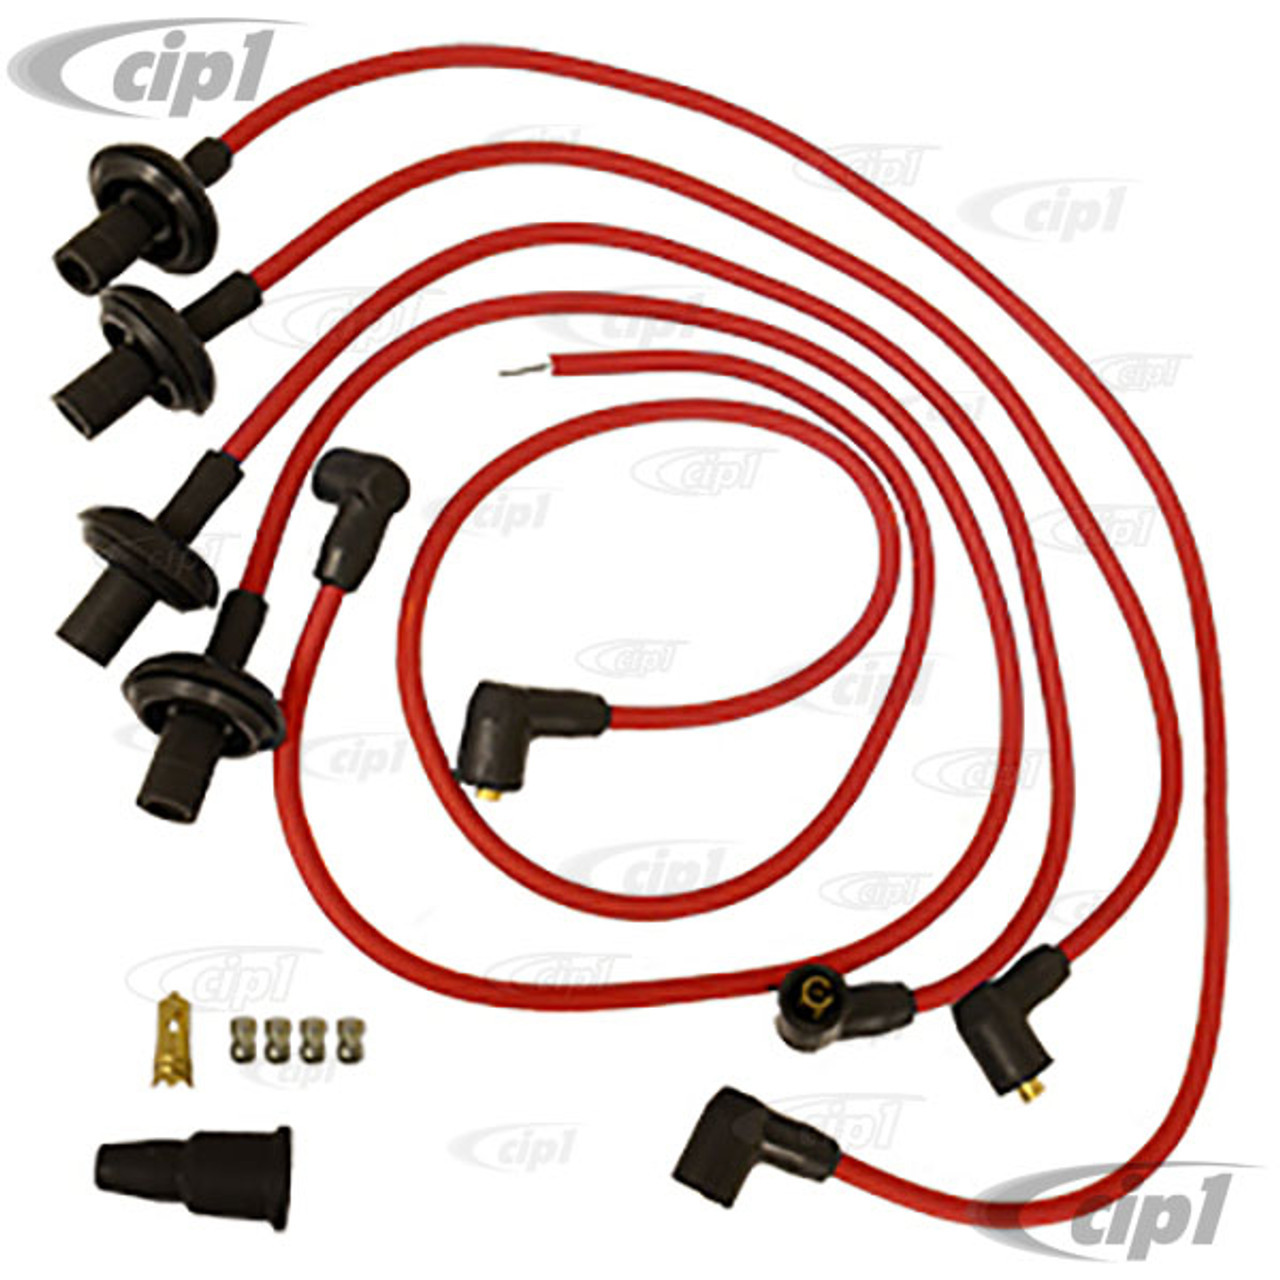 C13-9390 - SUPPRESSED IGNITION WIRE SET WITH 90 DEGREE CAP ENDS - BLUE -  ALL BEETLE/GHIA/BUS 52-71/TYPE-3 WITH 1600CC STYLE ENGINE (EXTRA LONG COIL